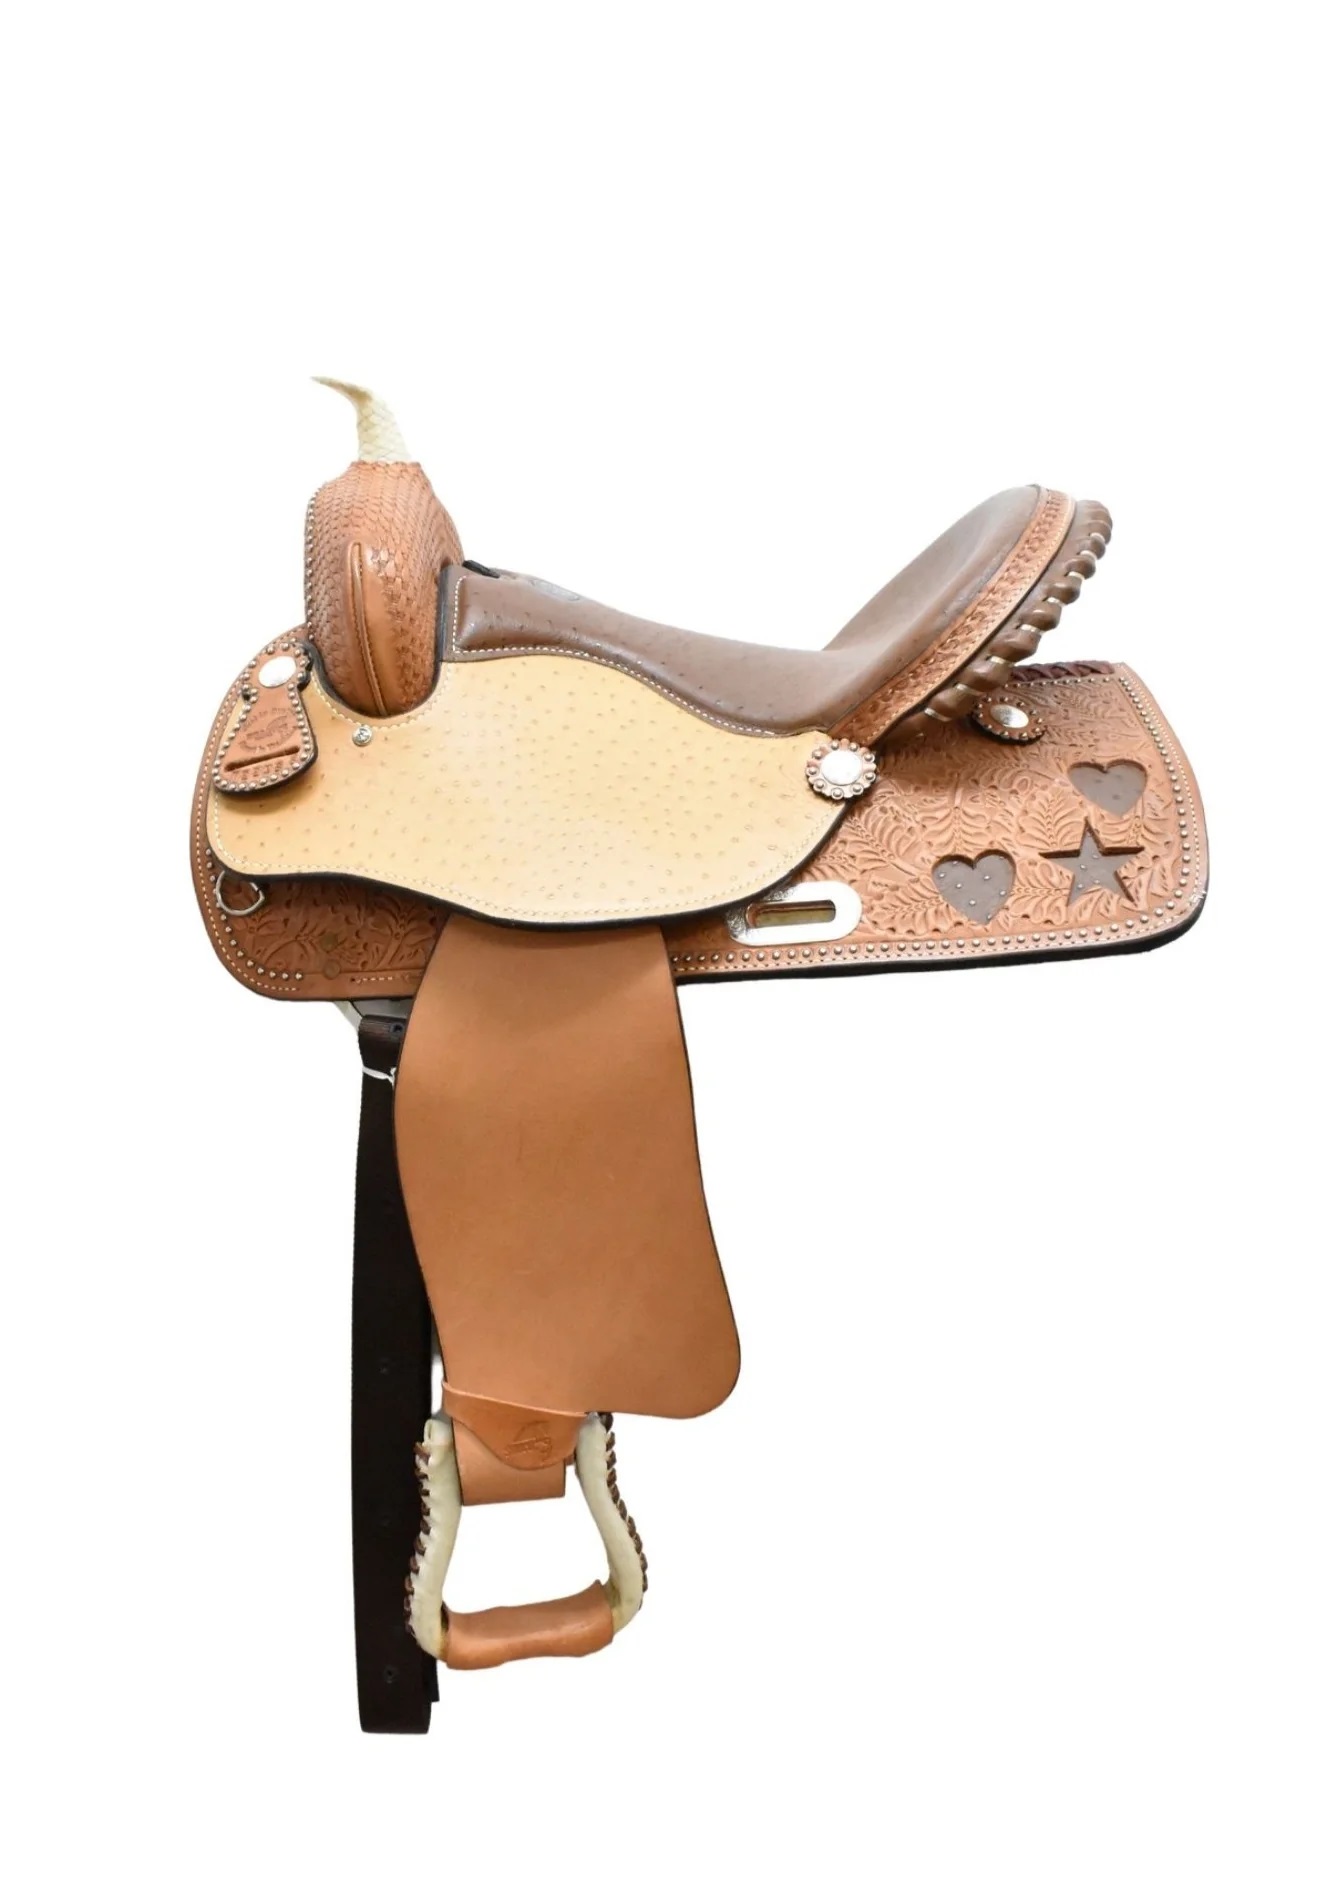 How To Store A Saddle Without A Rack